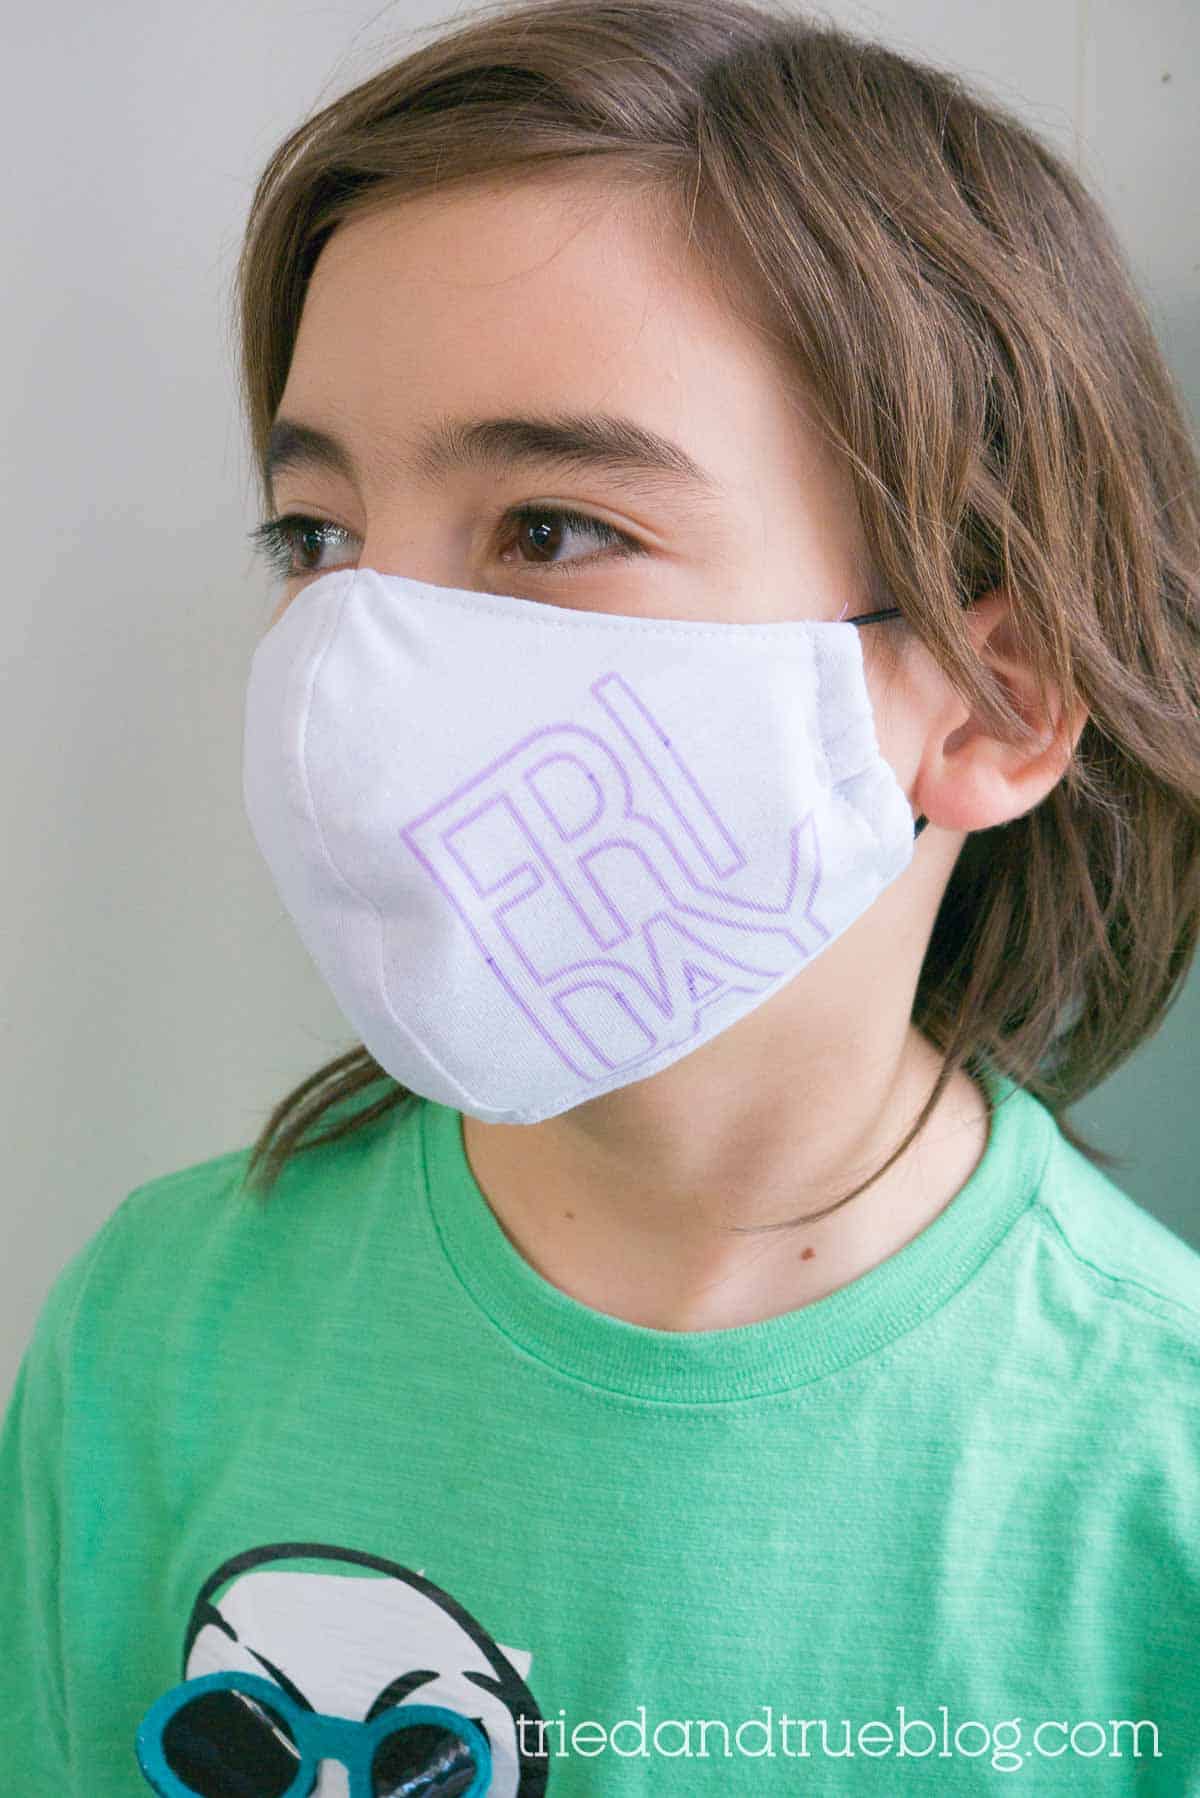 Child wearing face mask with "Friday."